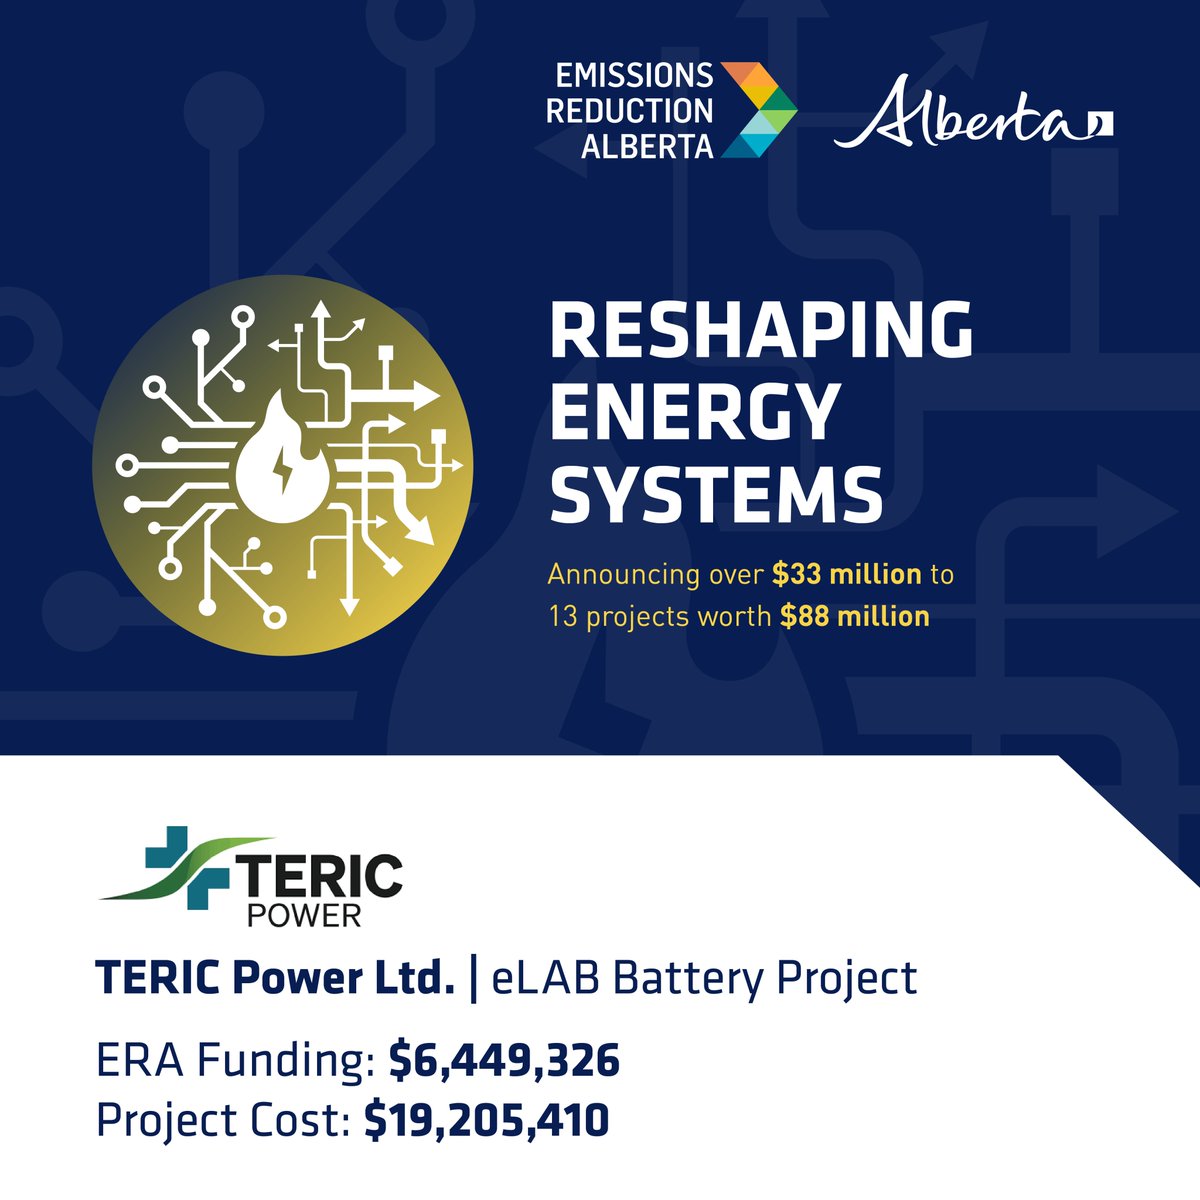 ERA is investing $6.4M in TERIC Power’s eLab Battery Project to install a 10MW battery technology at Keyera’s Alberta EnviroFuels plant to provide energy storage and reliability benefits to both the industrial facility and the Alberta grid. #ERAFunded @YourAlberta @rebeccakschulz